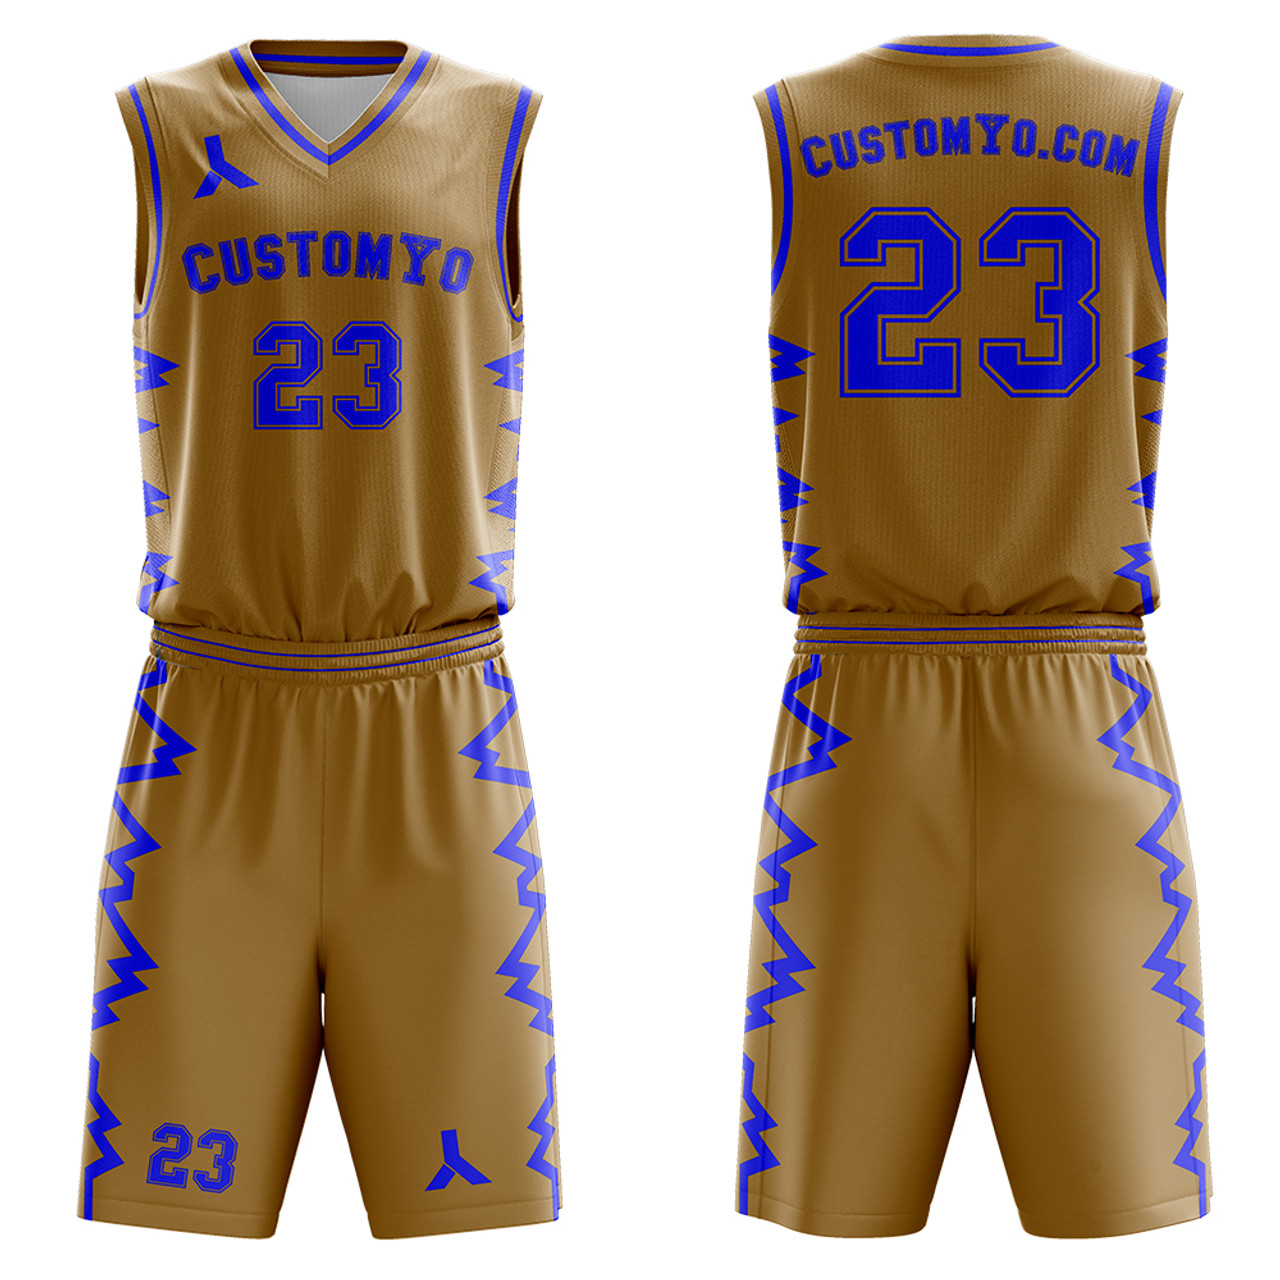 Personalize Your Own Basketball Jersey with Your Custom Name and Number True Navy, Youth X-Small 